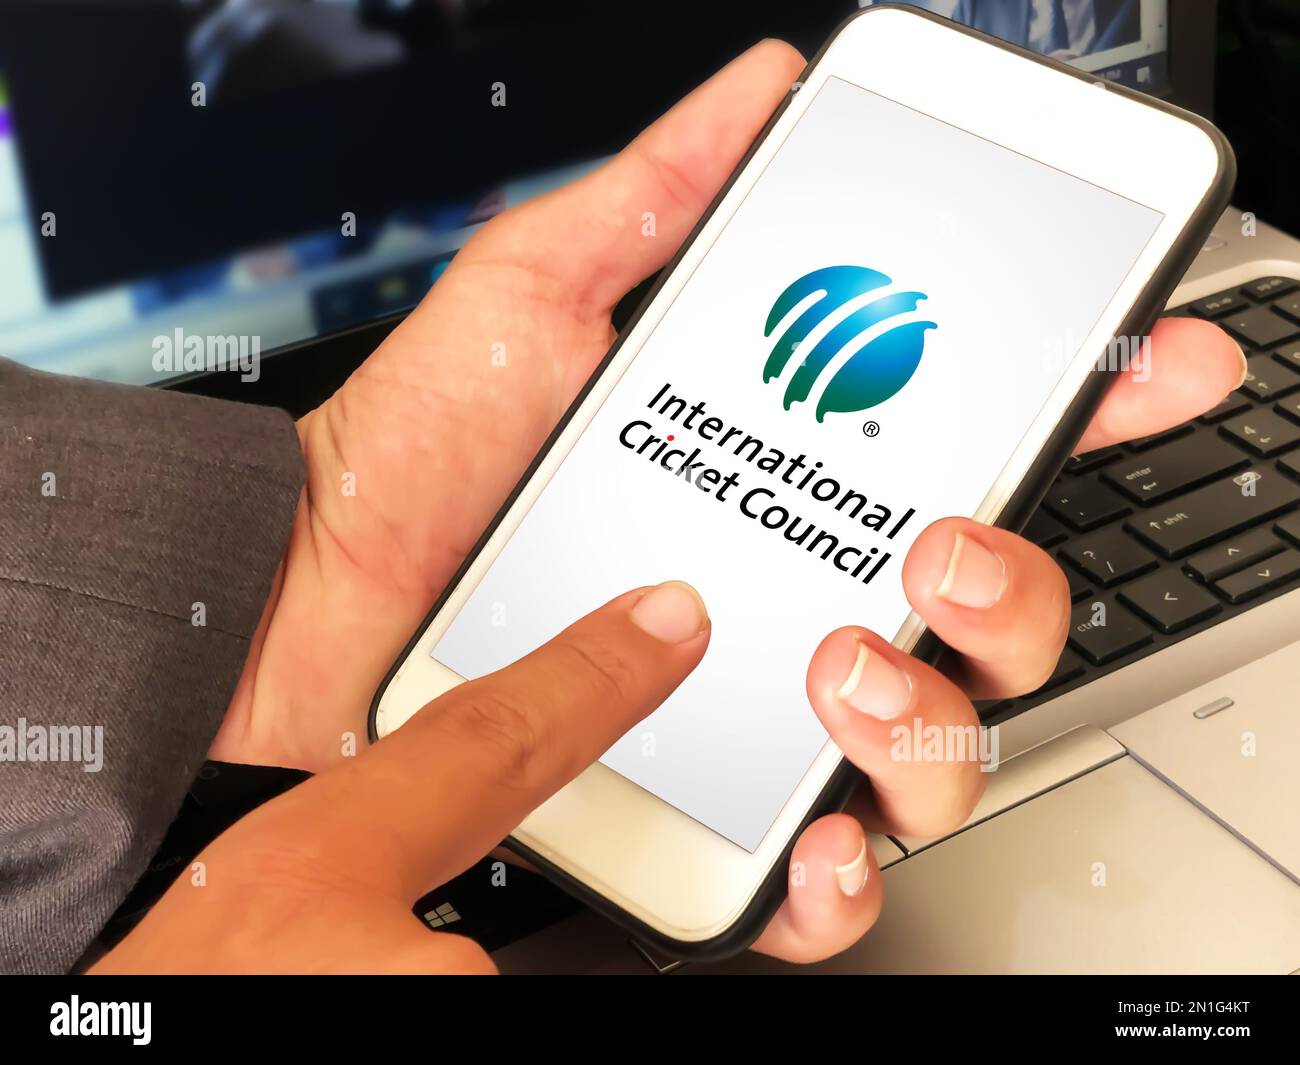 Man using ICC mobile application editorial with laptop in the background